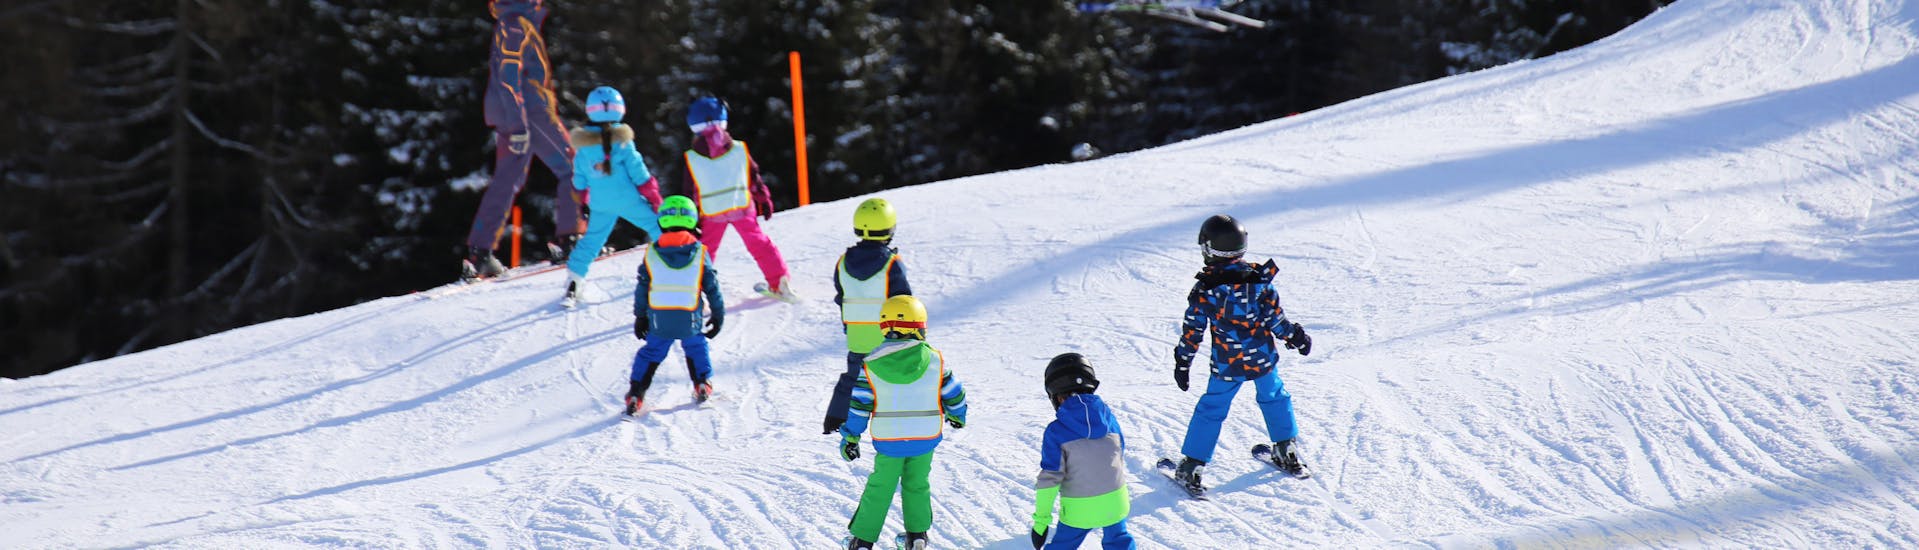 A group of young skiers is following their ski instructor from Family Ski School GO! Bad Gastein on the slope during the Kids Ski Lessons (7-11 y.) for First Timers.